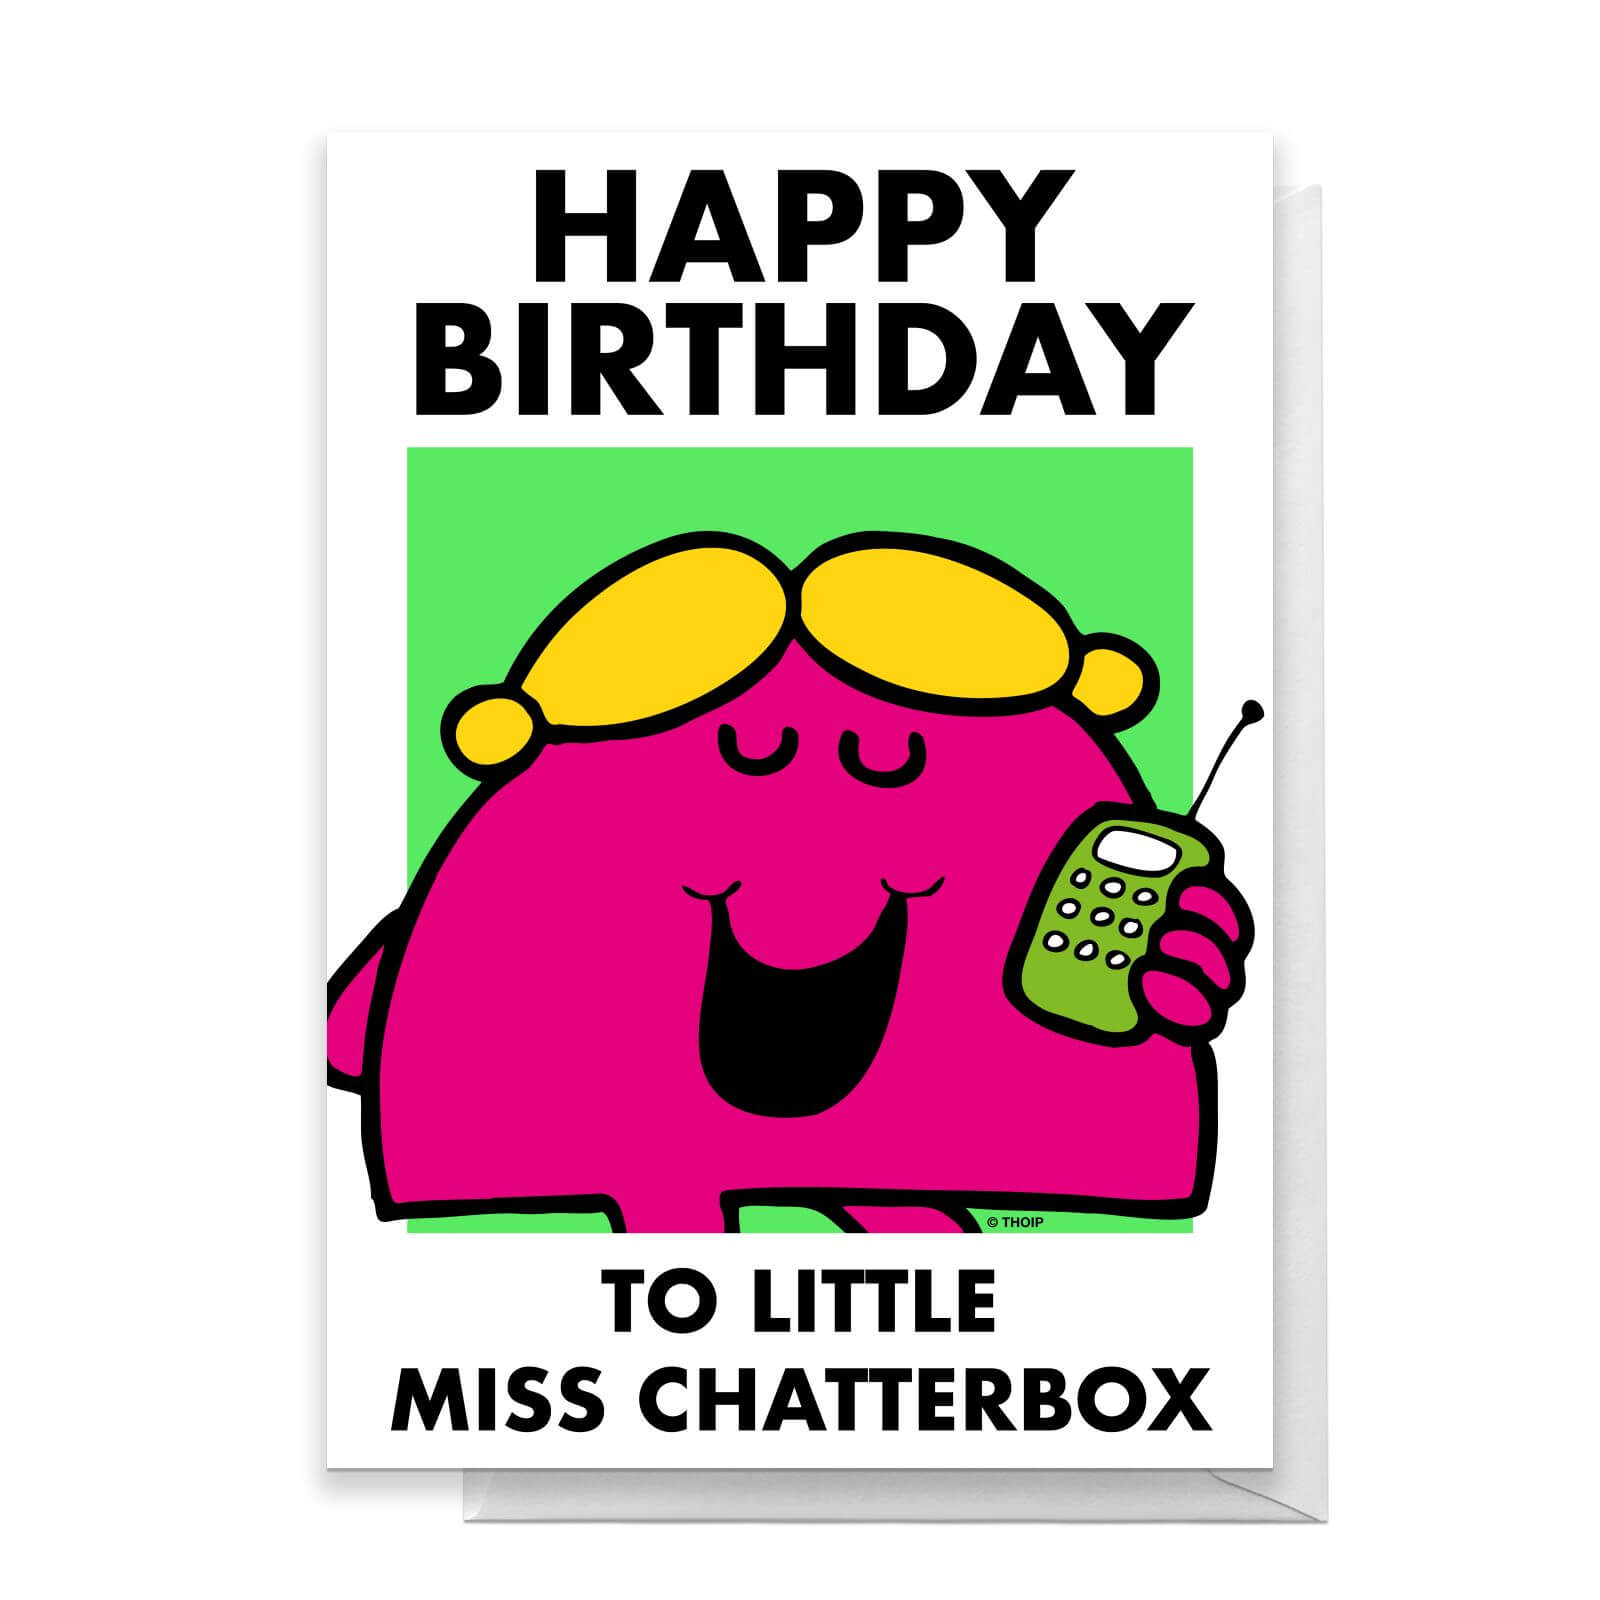 Mr Men & Little Miss Happy Birthday To Little Miss ChatterBox Greetings Card - Standard Card